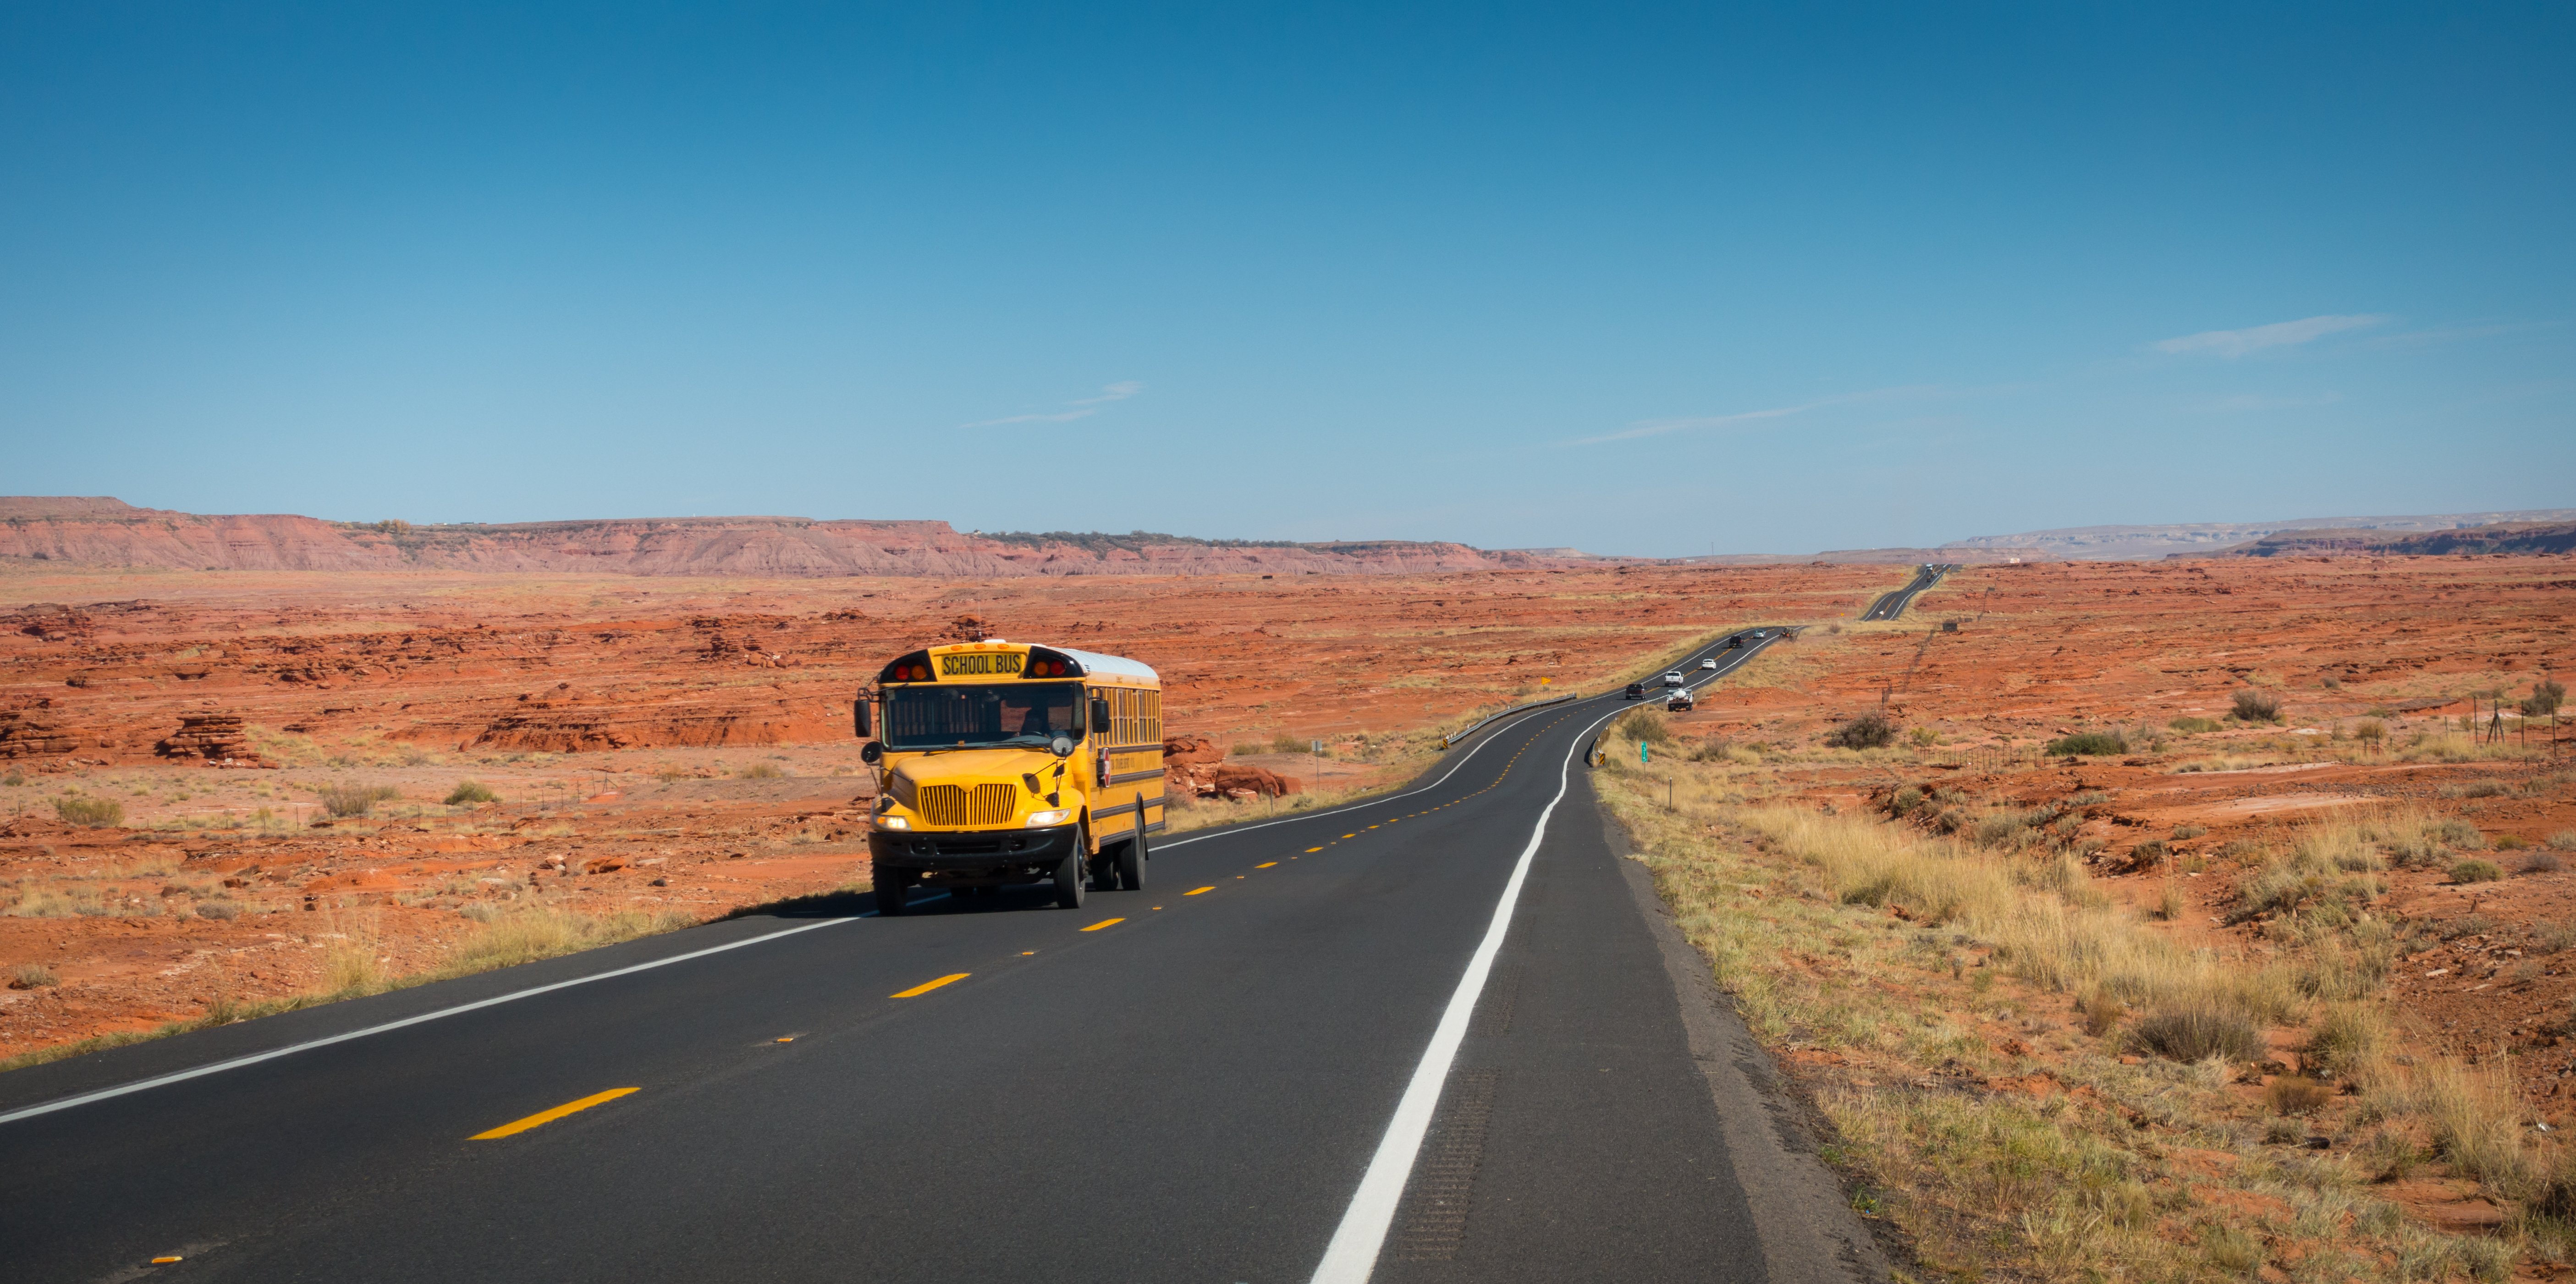 The differences in education and transportation in urban vs. rural areas